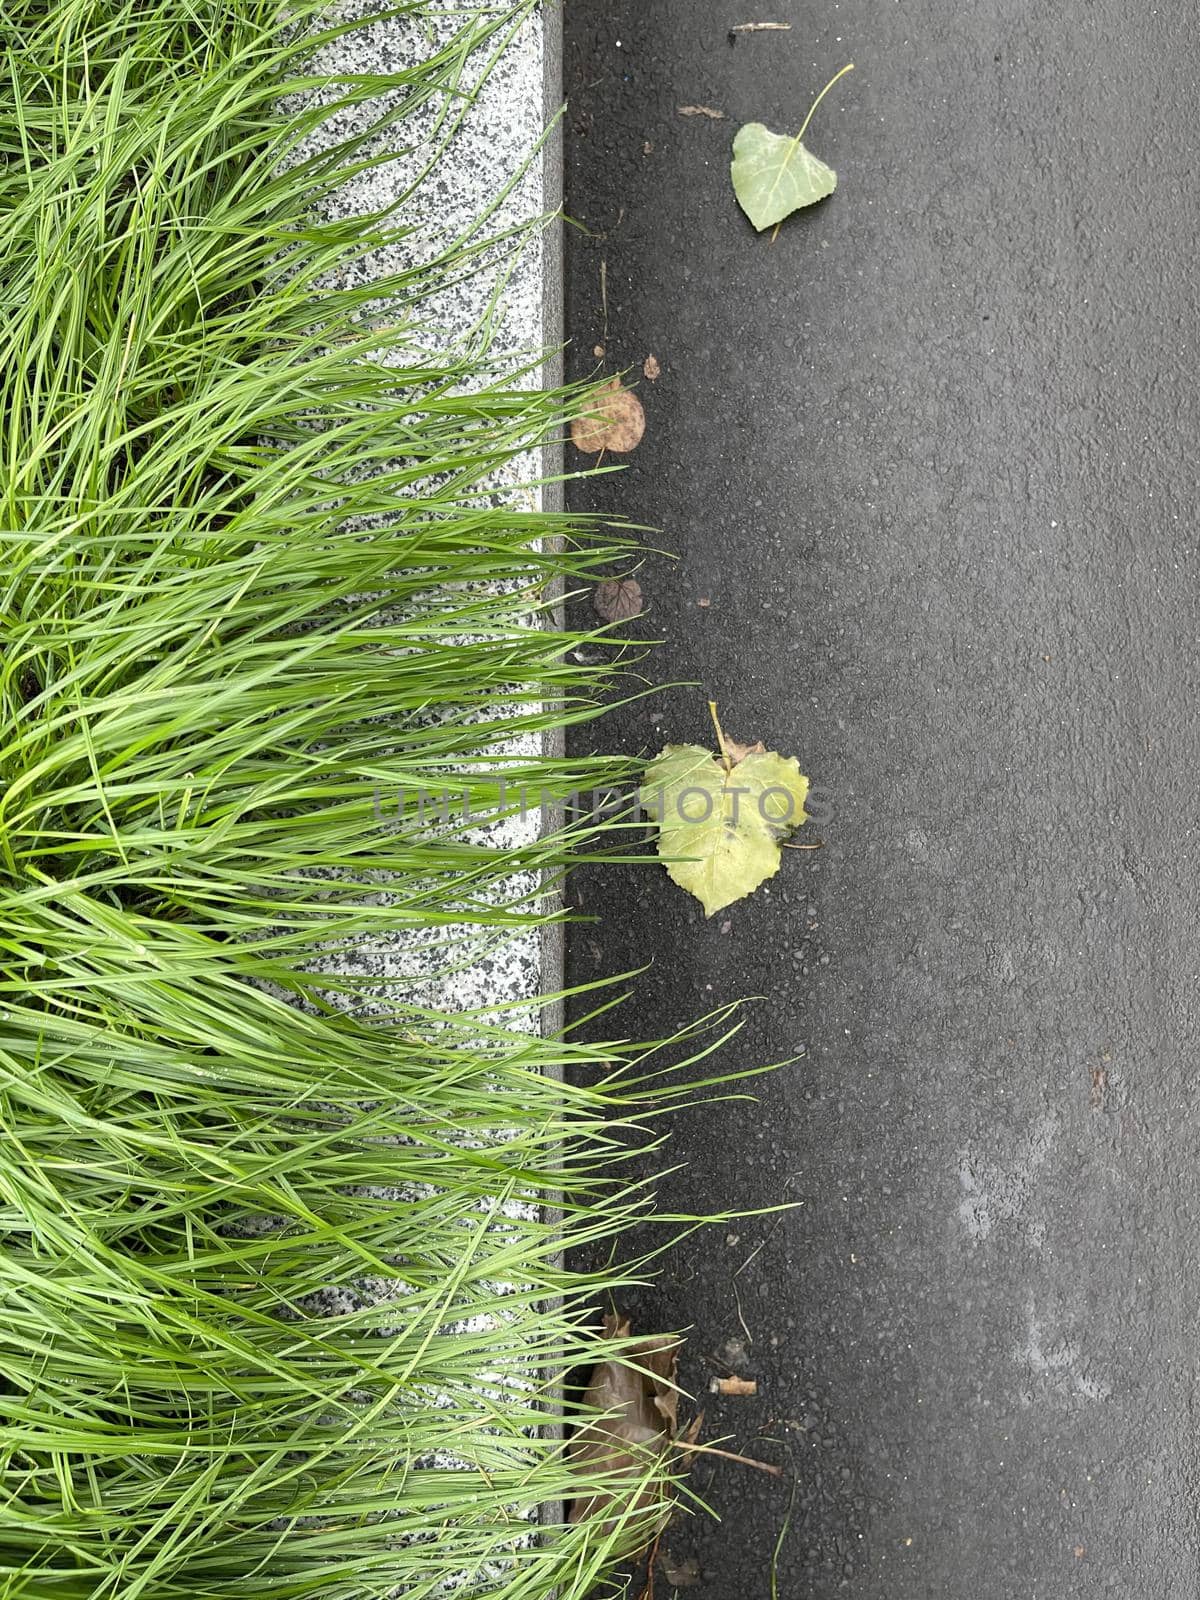 Top view shot of green grass next to grey concrete sidewalk in the city